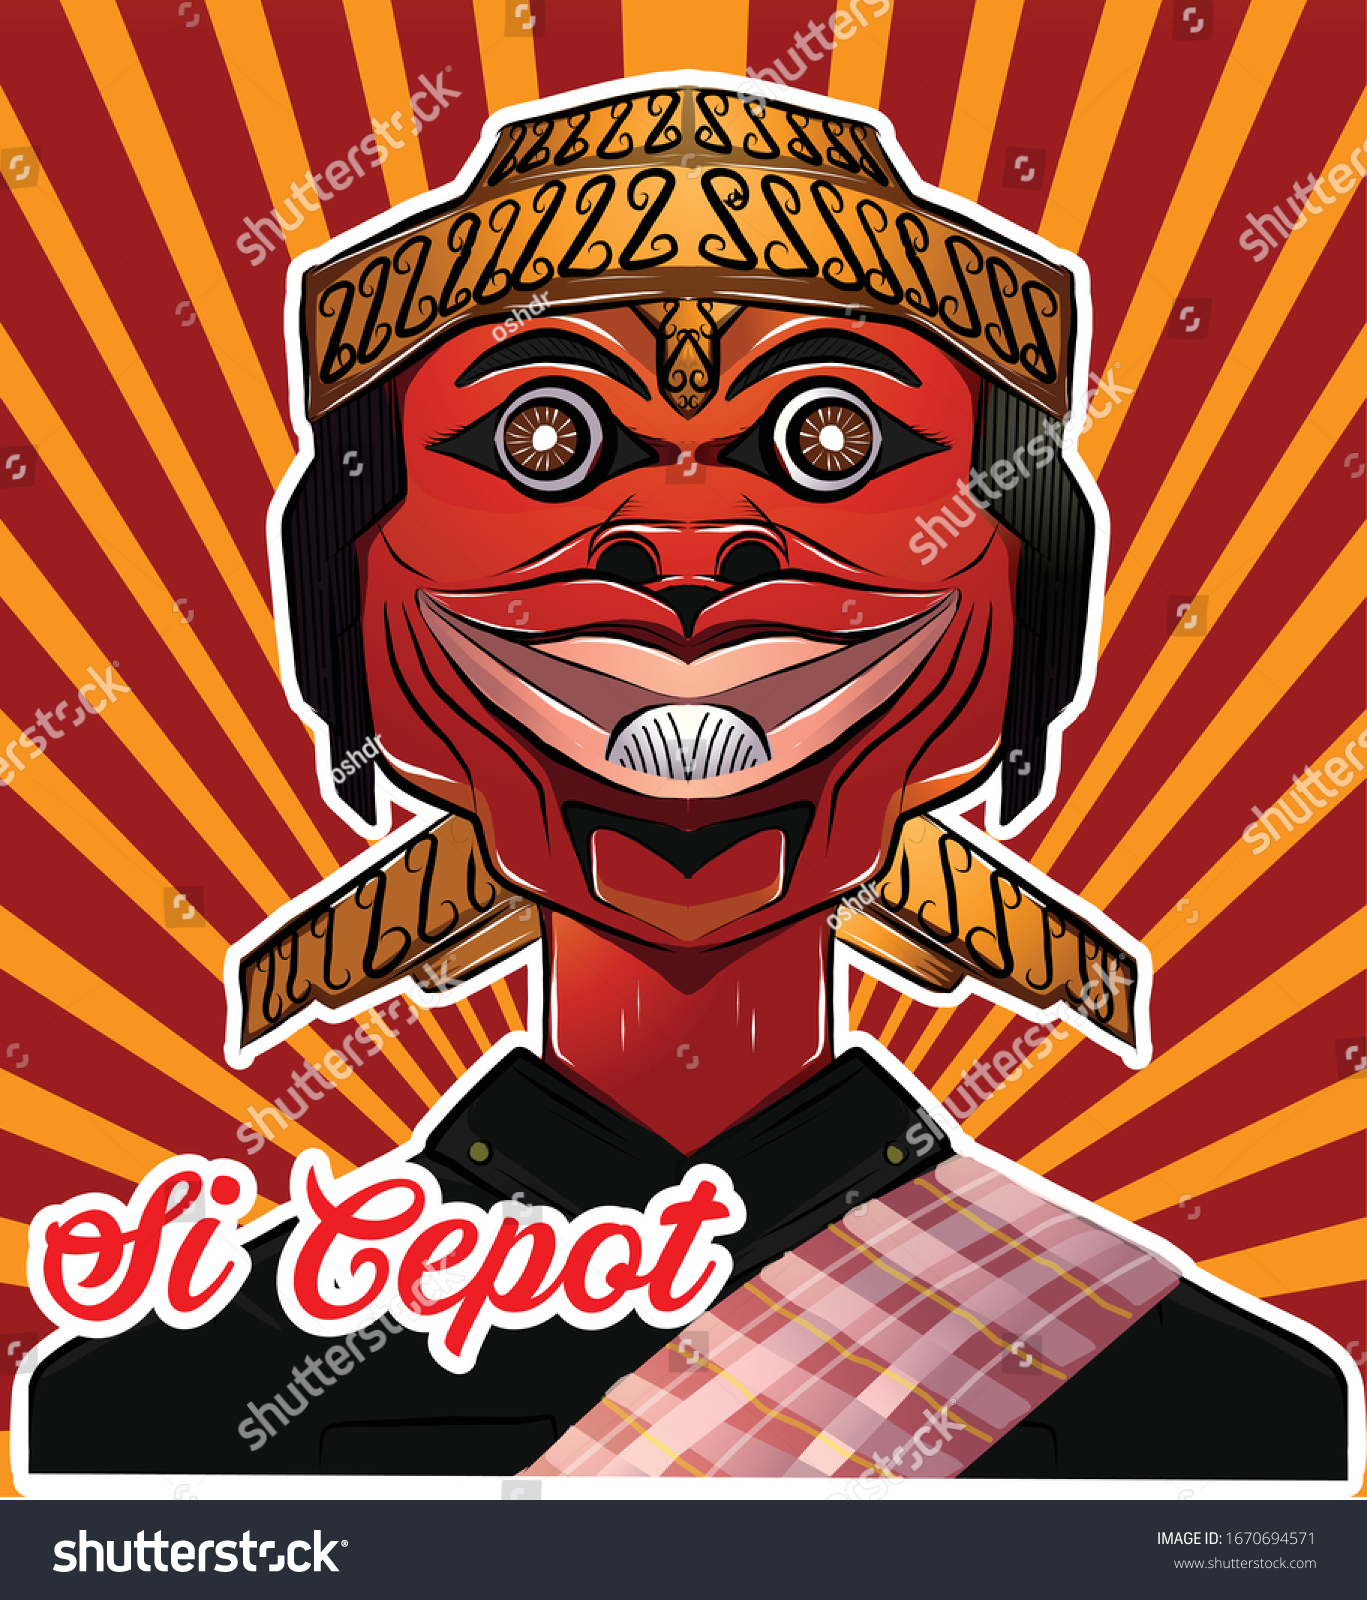 SVG of Si Cepot, traditional Sundanese puppetry  character. svg